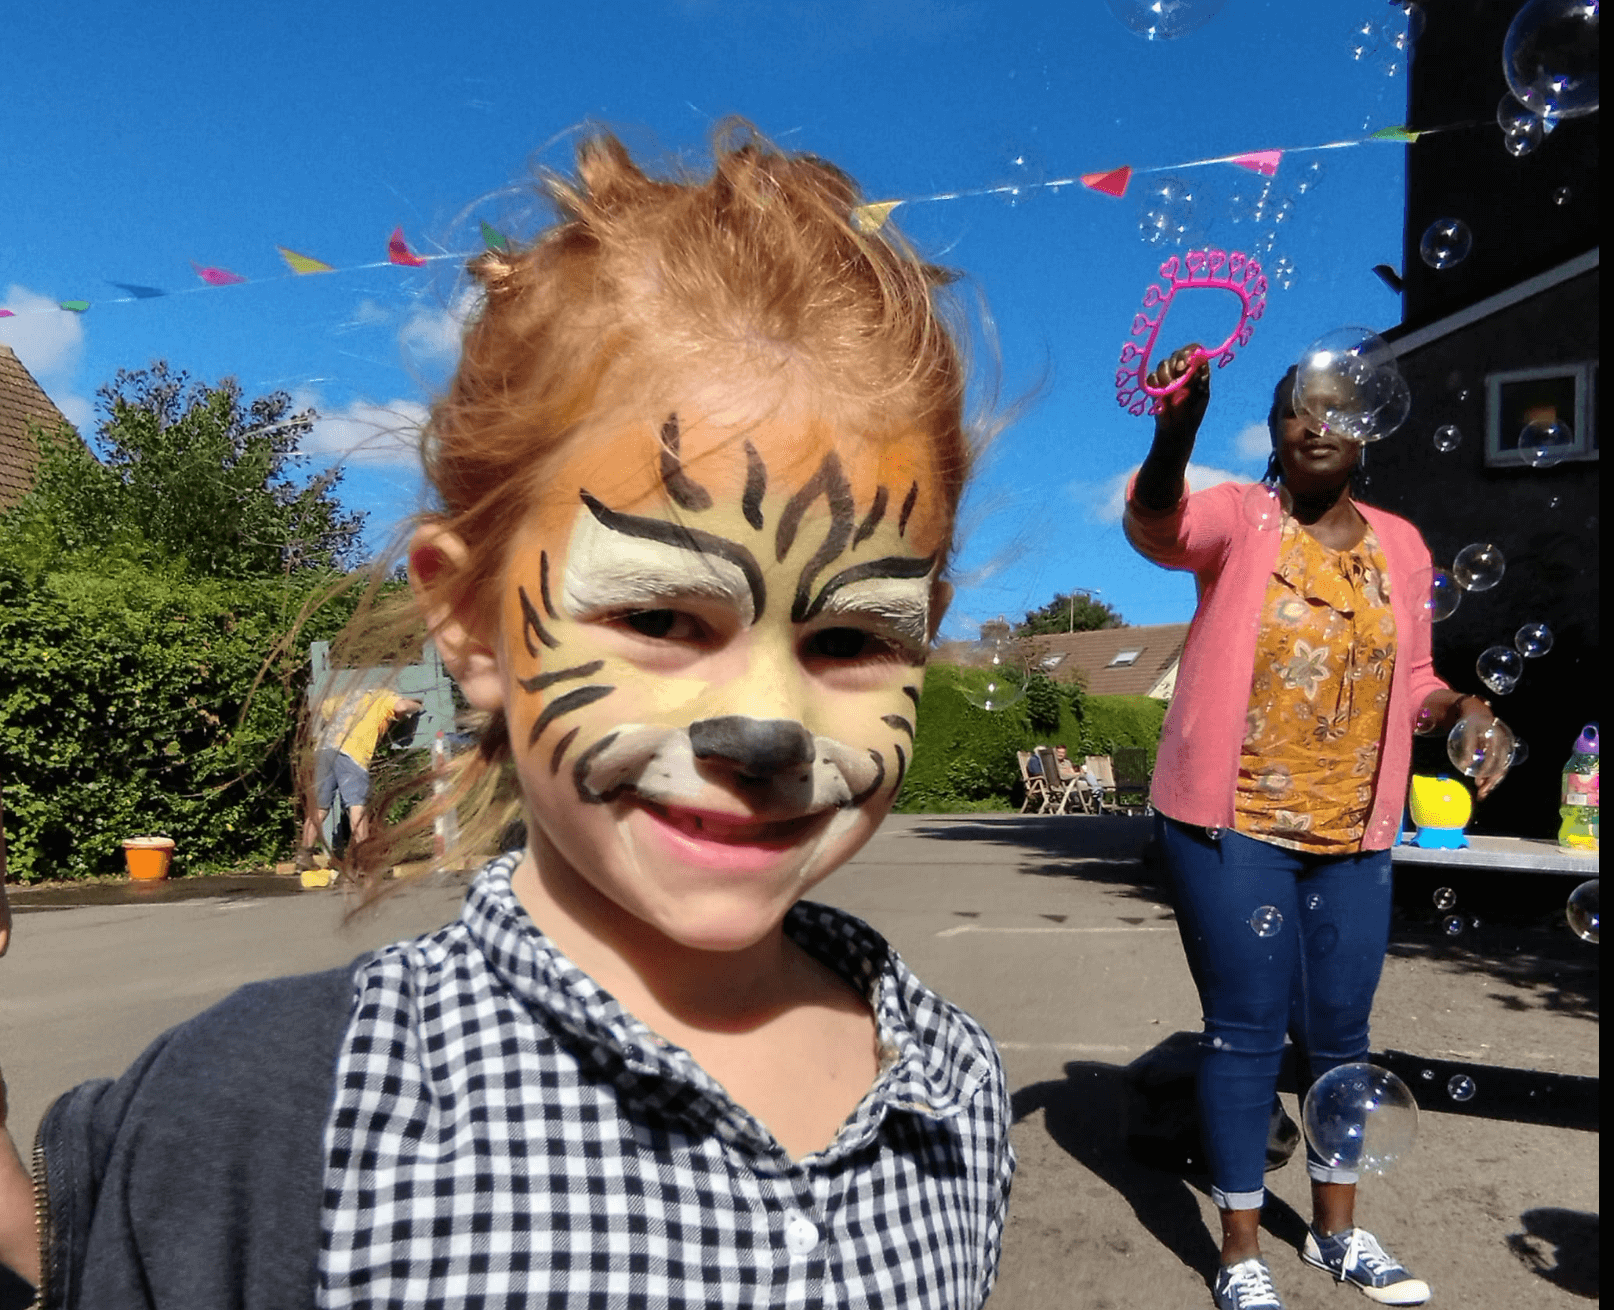 a girl with her face painted while a woman makes large bubbles behind her